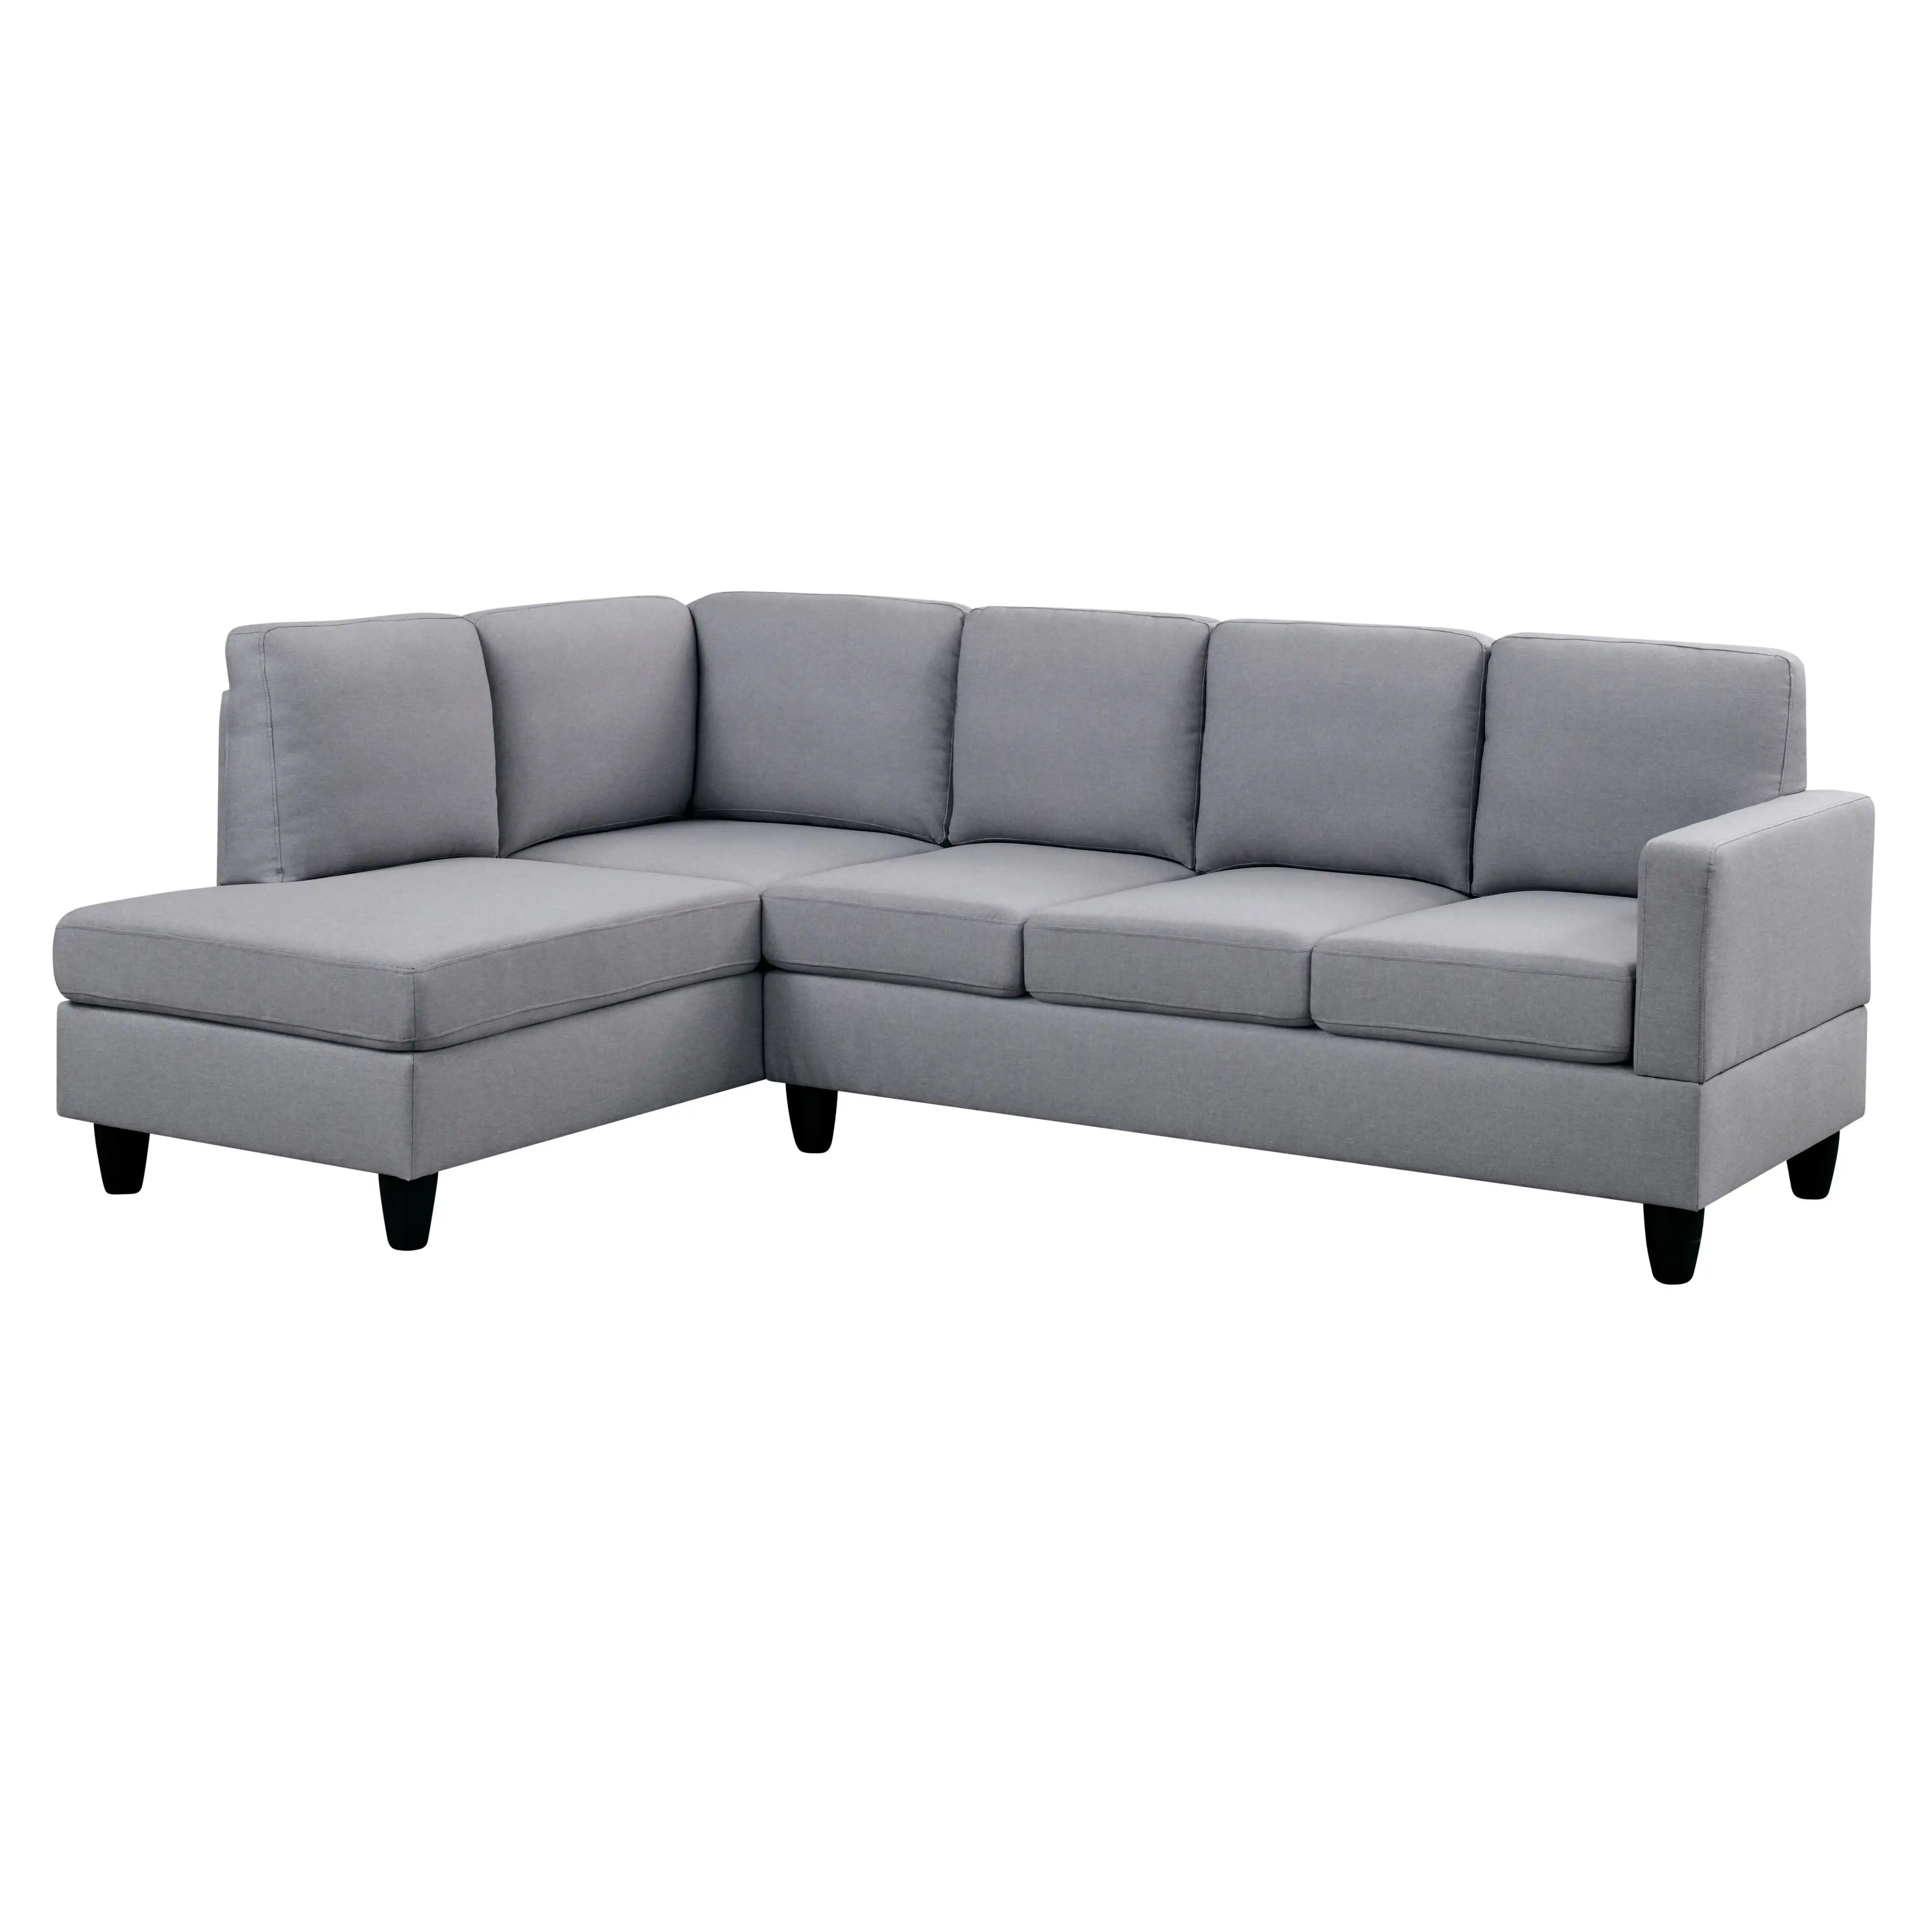 Renner 2 - Piece Upholstered Sectional